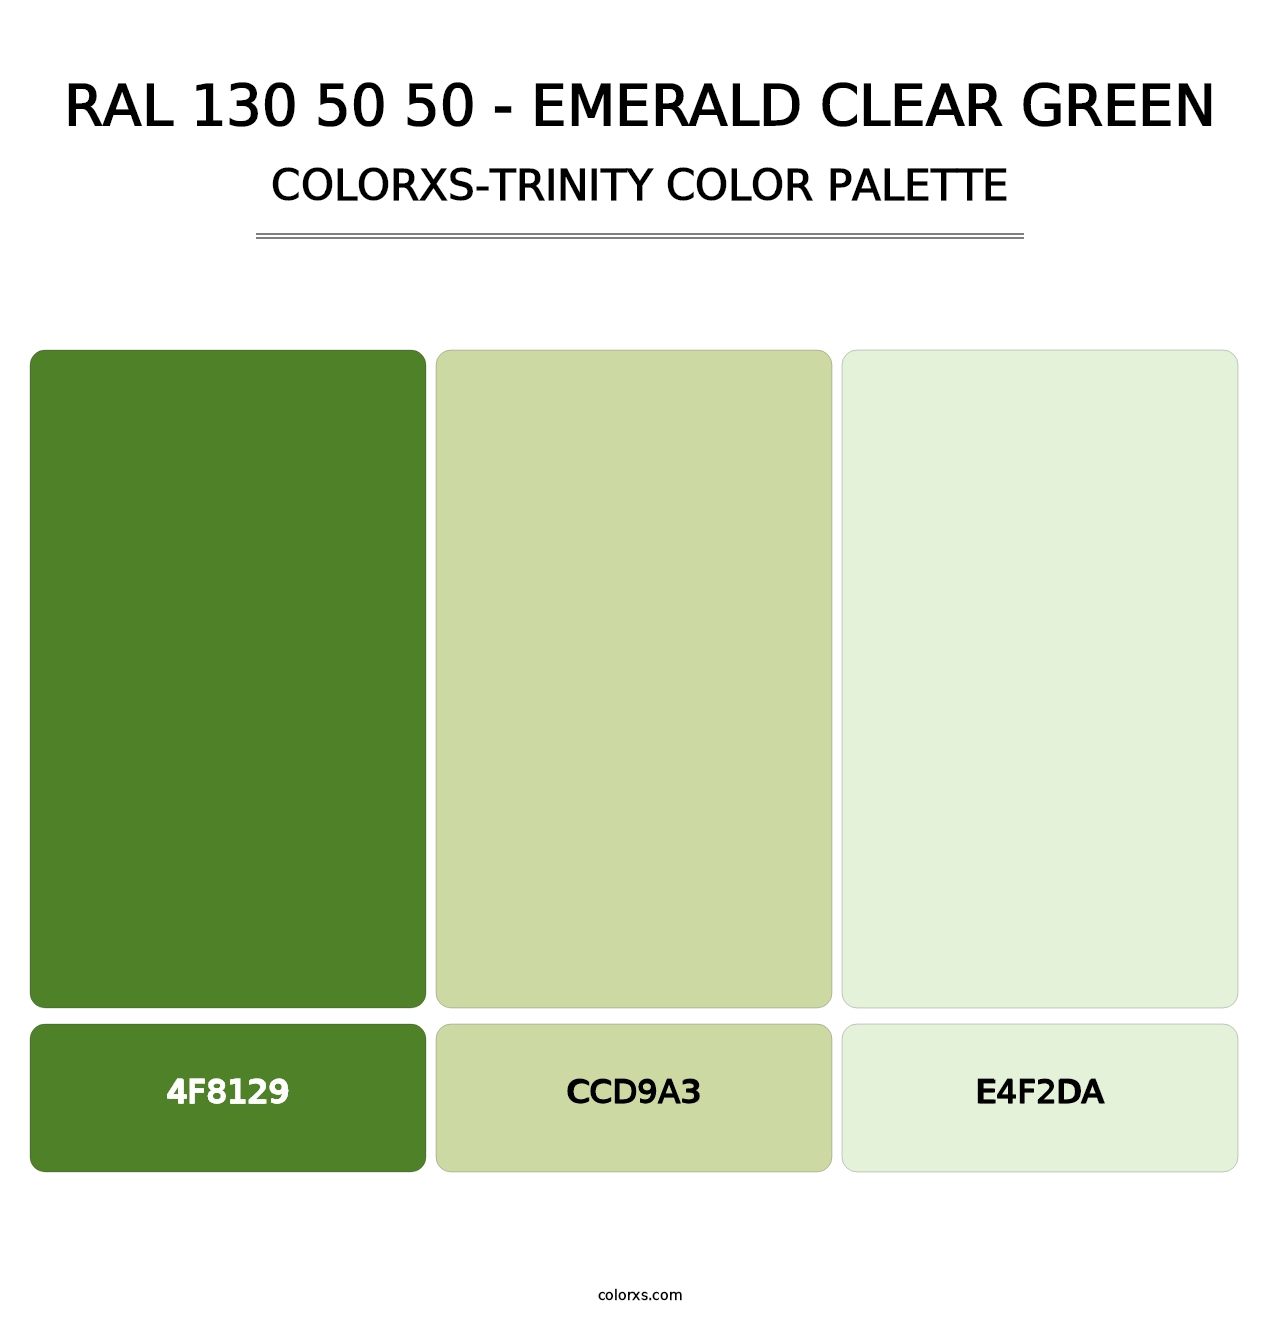 RAL 130 50 50 - Emerald Clear Green - Colorxs Trinity Palette